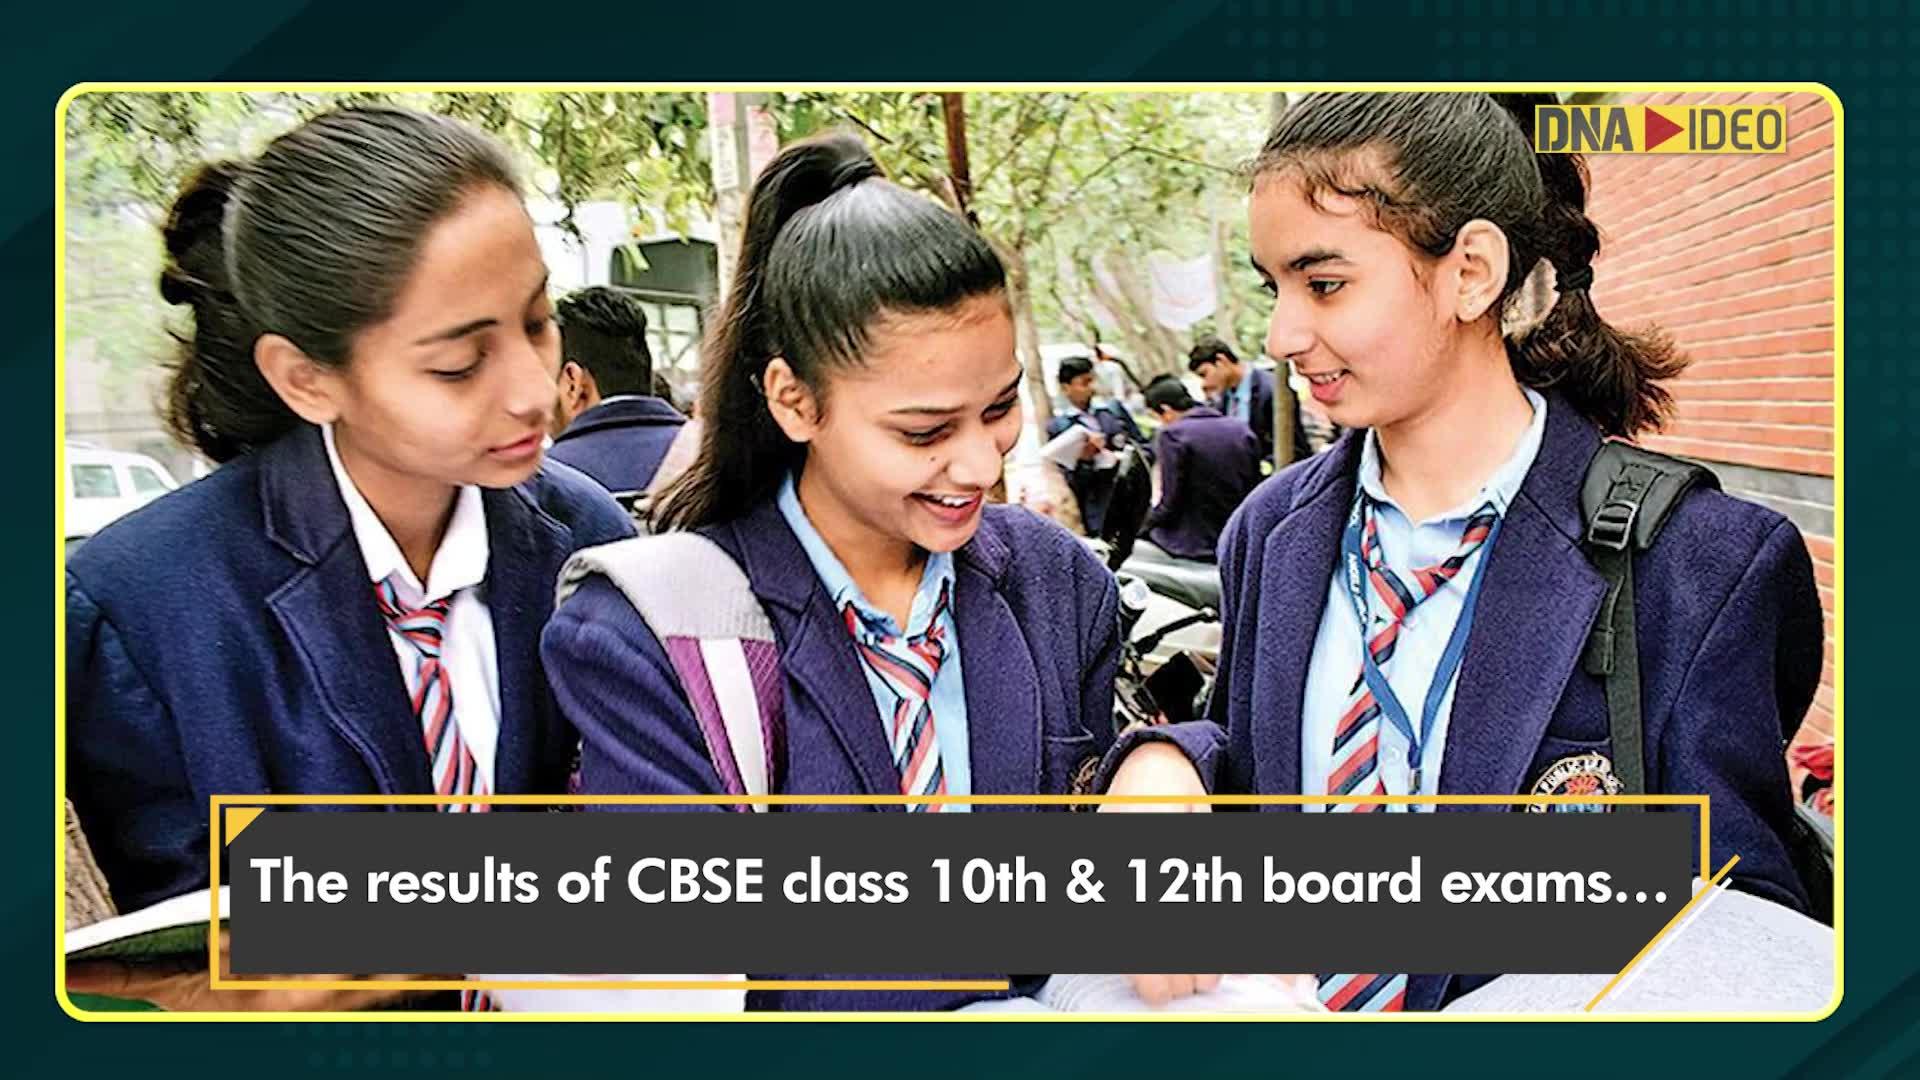 1920px x 1080px - CBSE to release results of class 10, 12 board exams by Jan 15, here's how  you can check the results